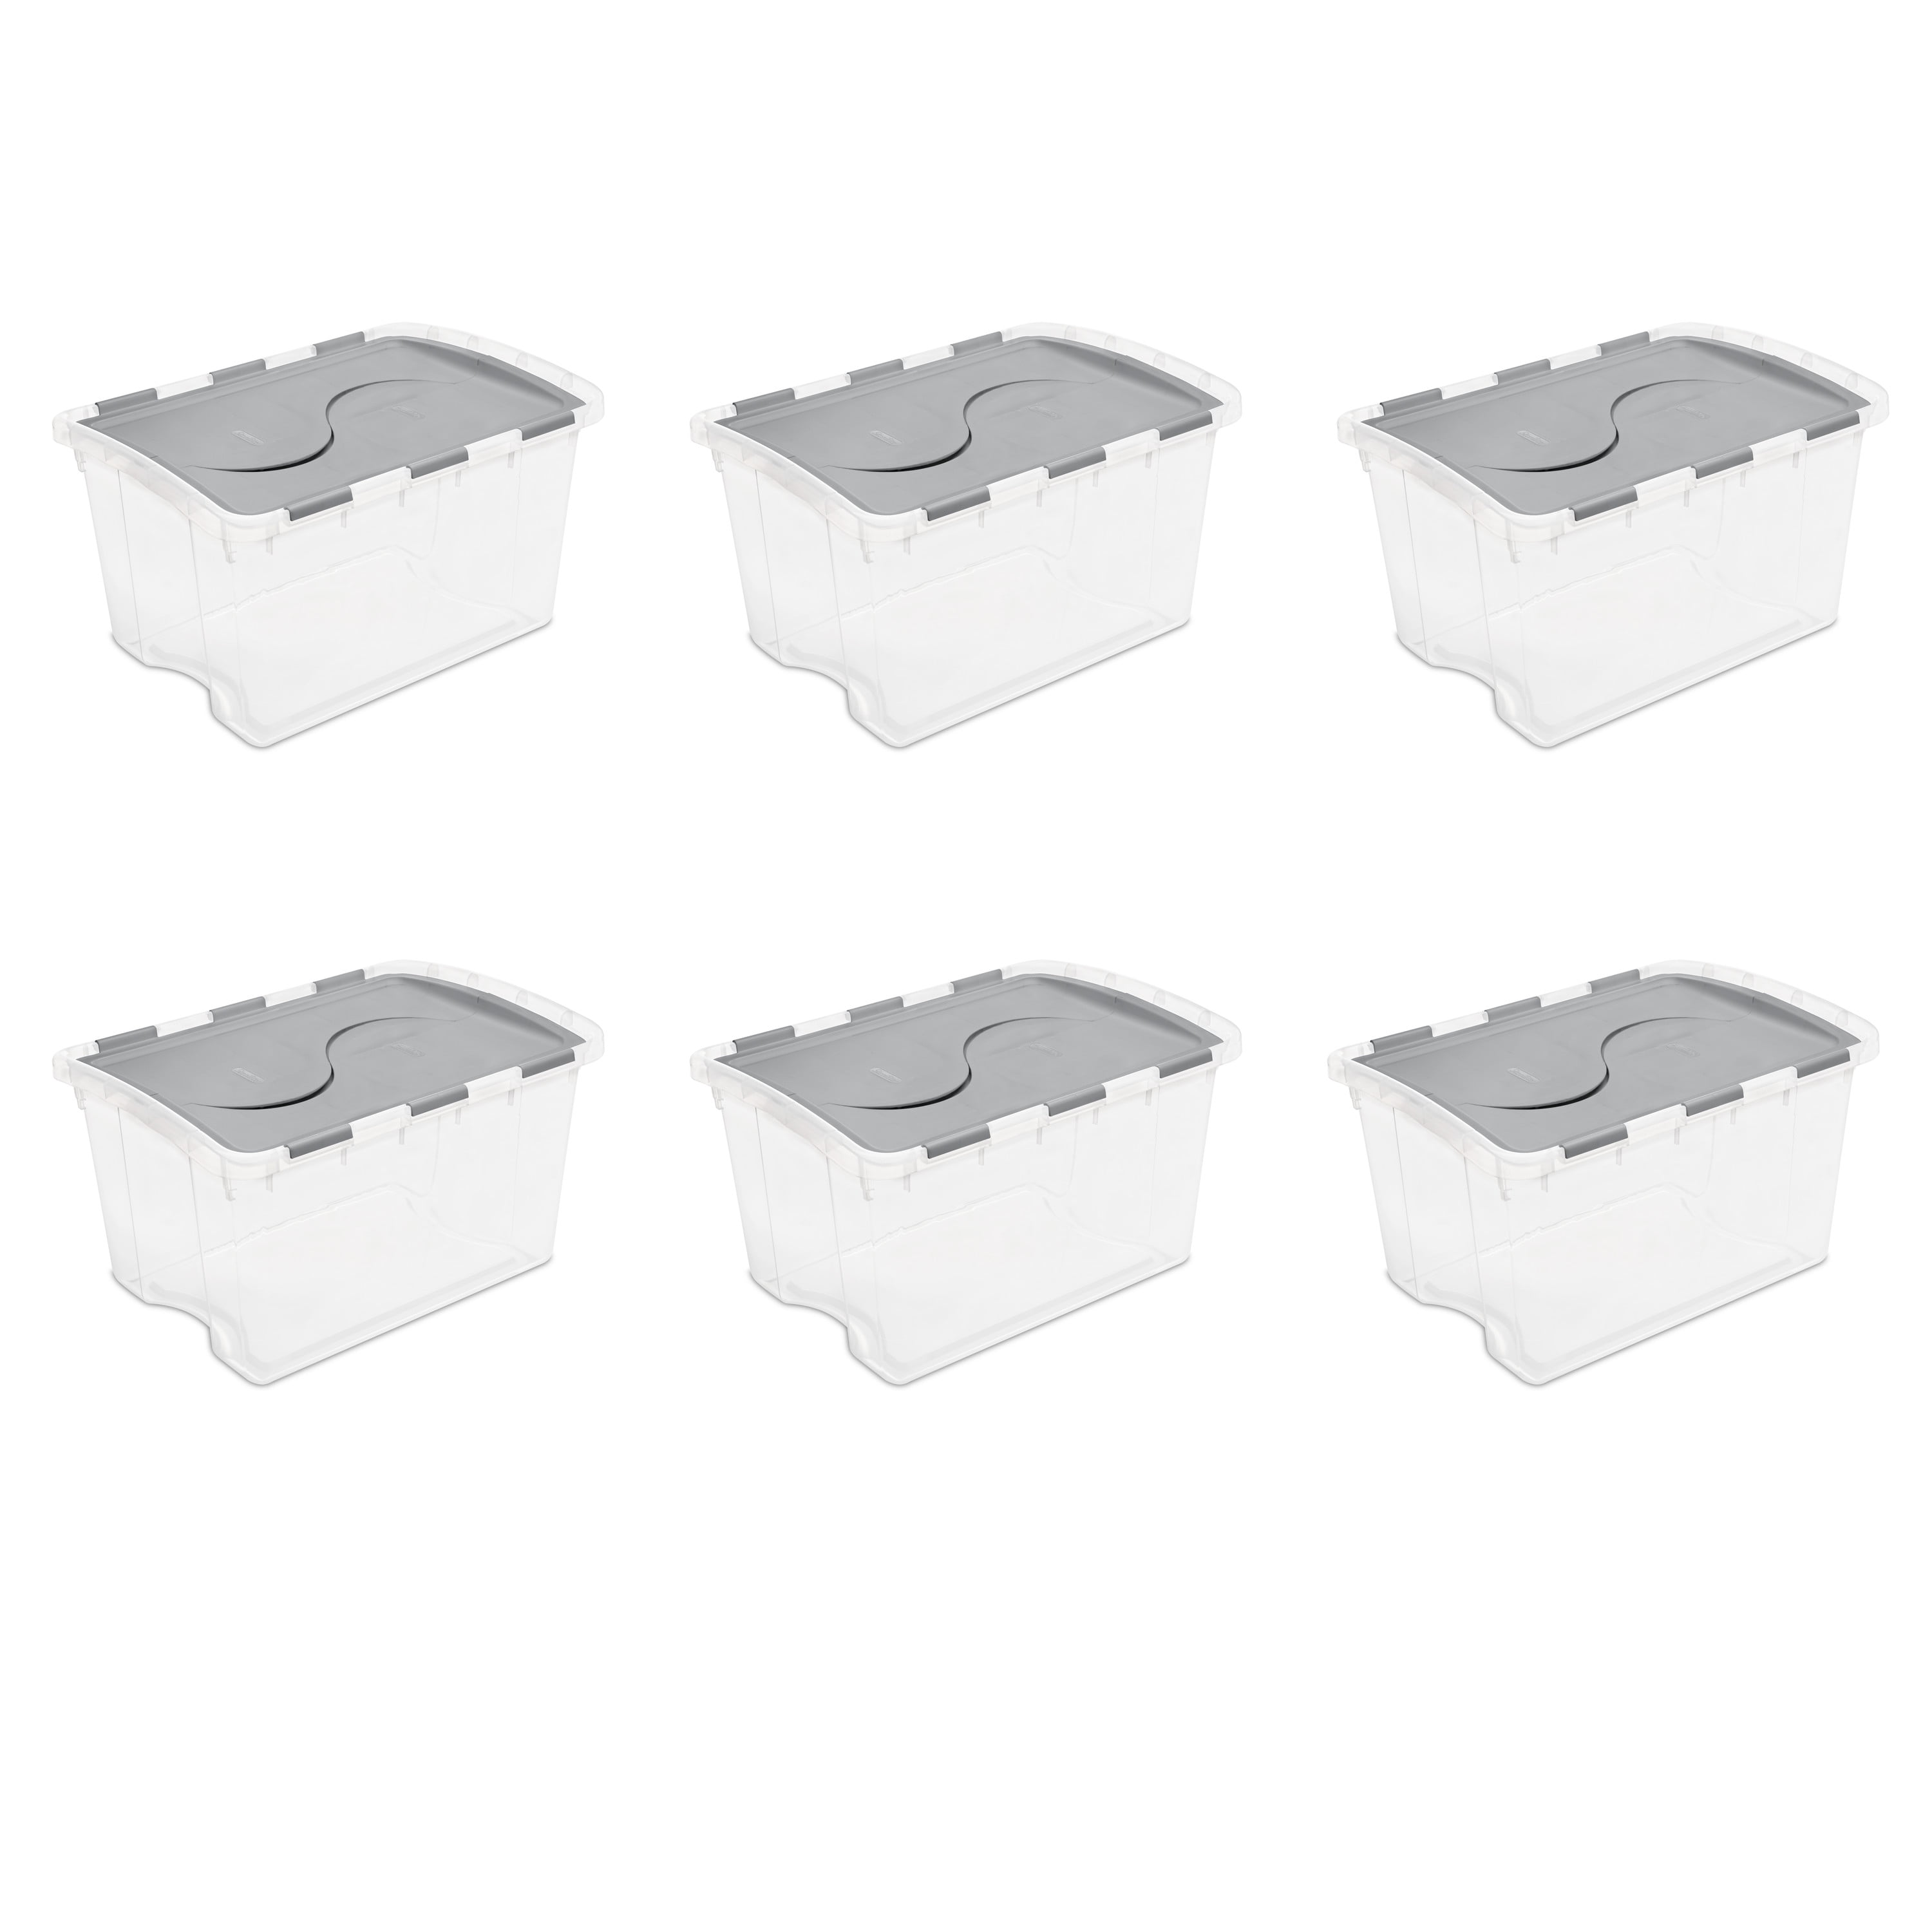 50 Pack 6"x 6"x 3" Clear Hinged Take-Out Containers with Snap-On Corners 